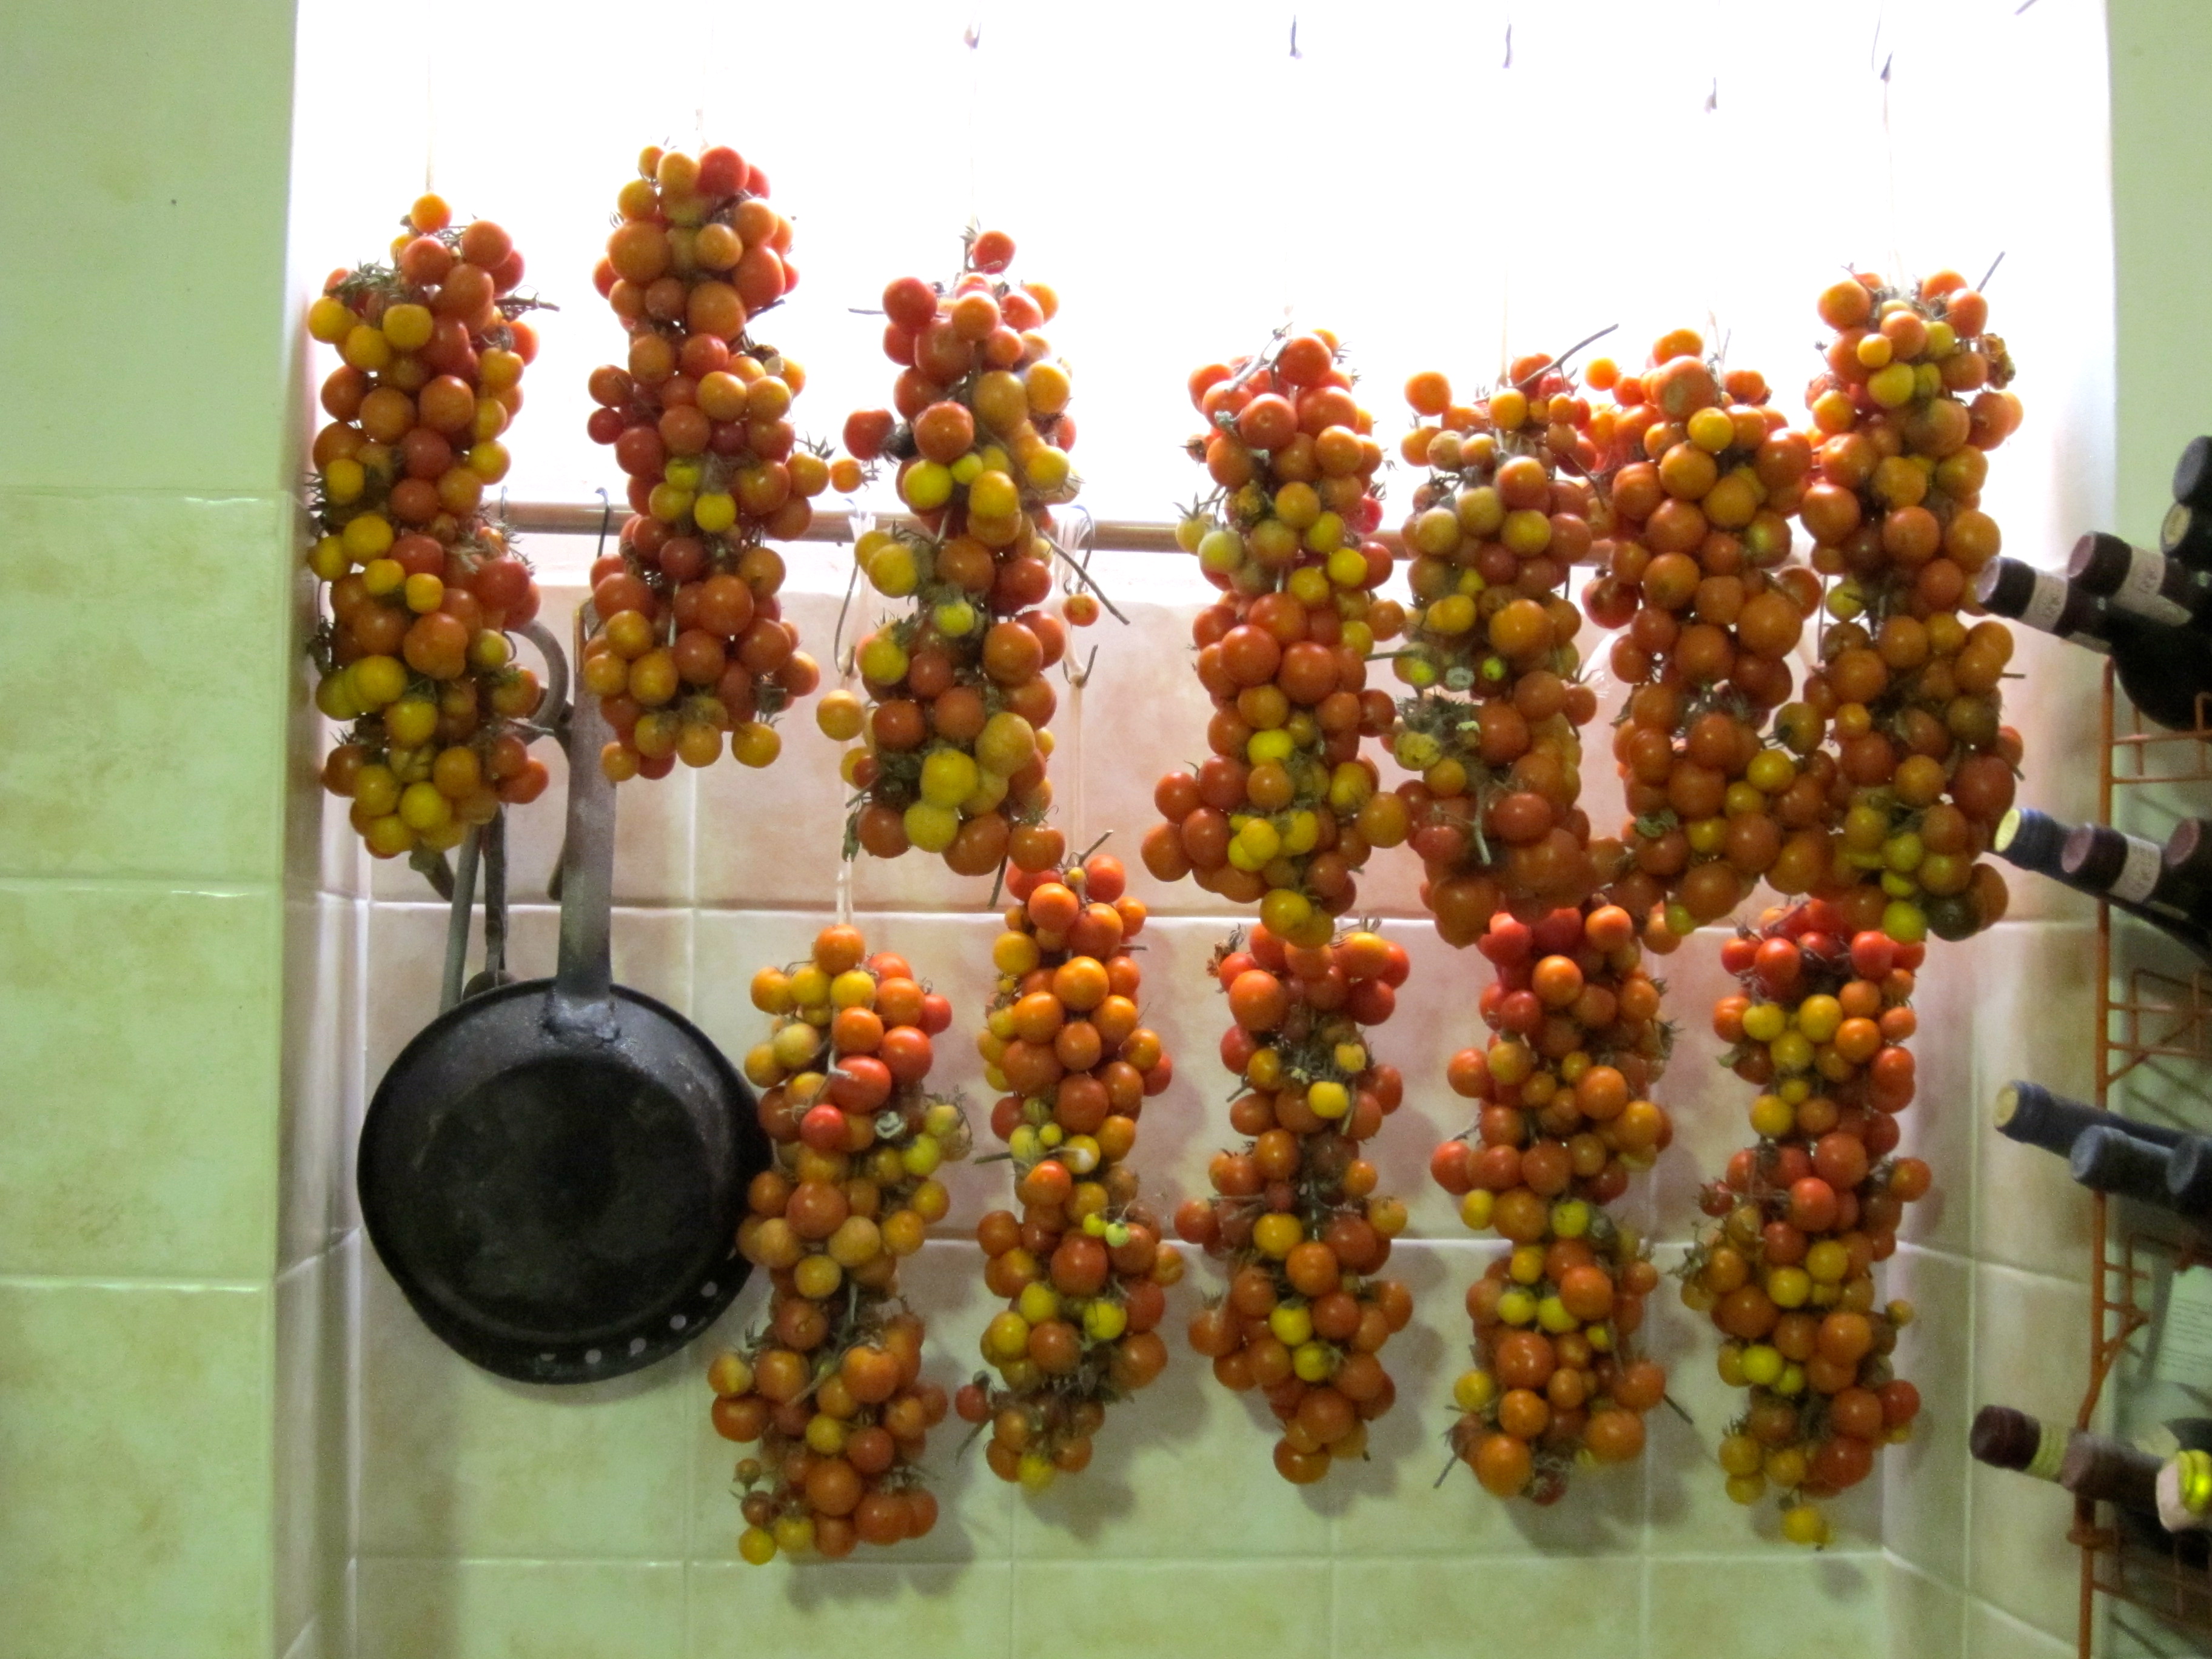 Hanging tomatoes in storage at Masseria Aprile | Diary of a Tomato